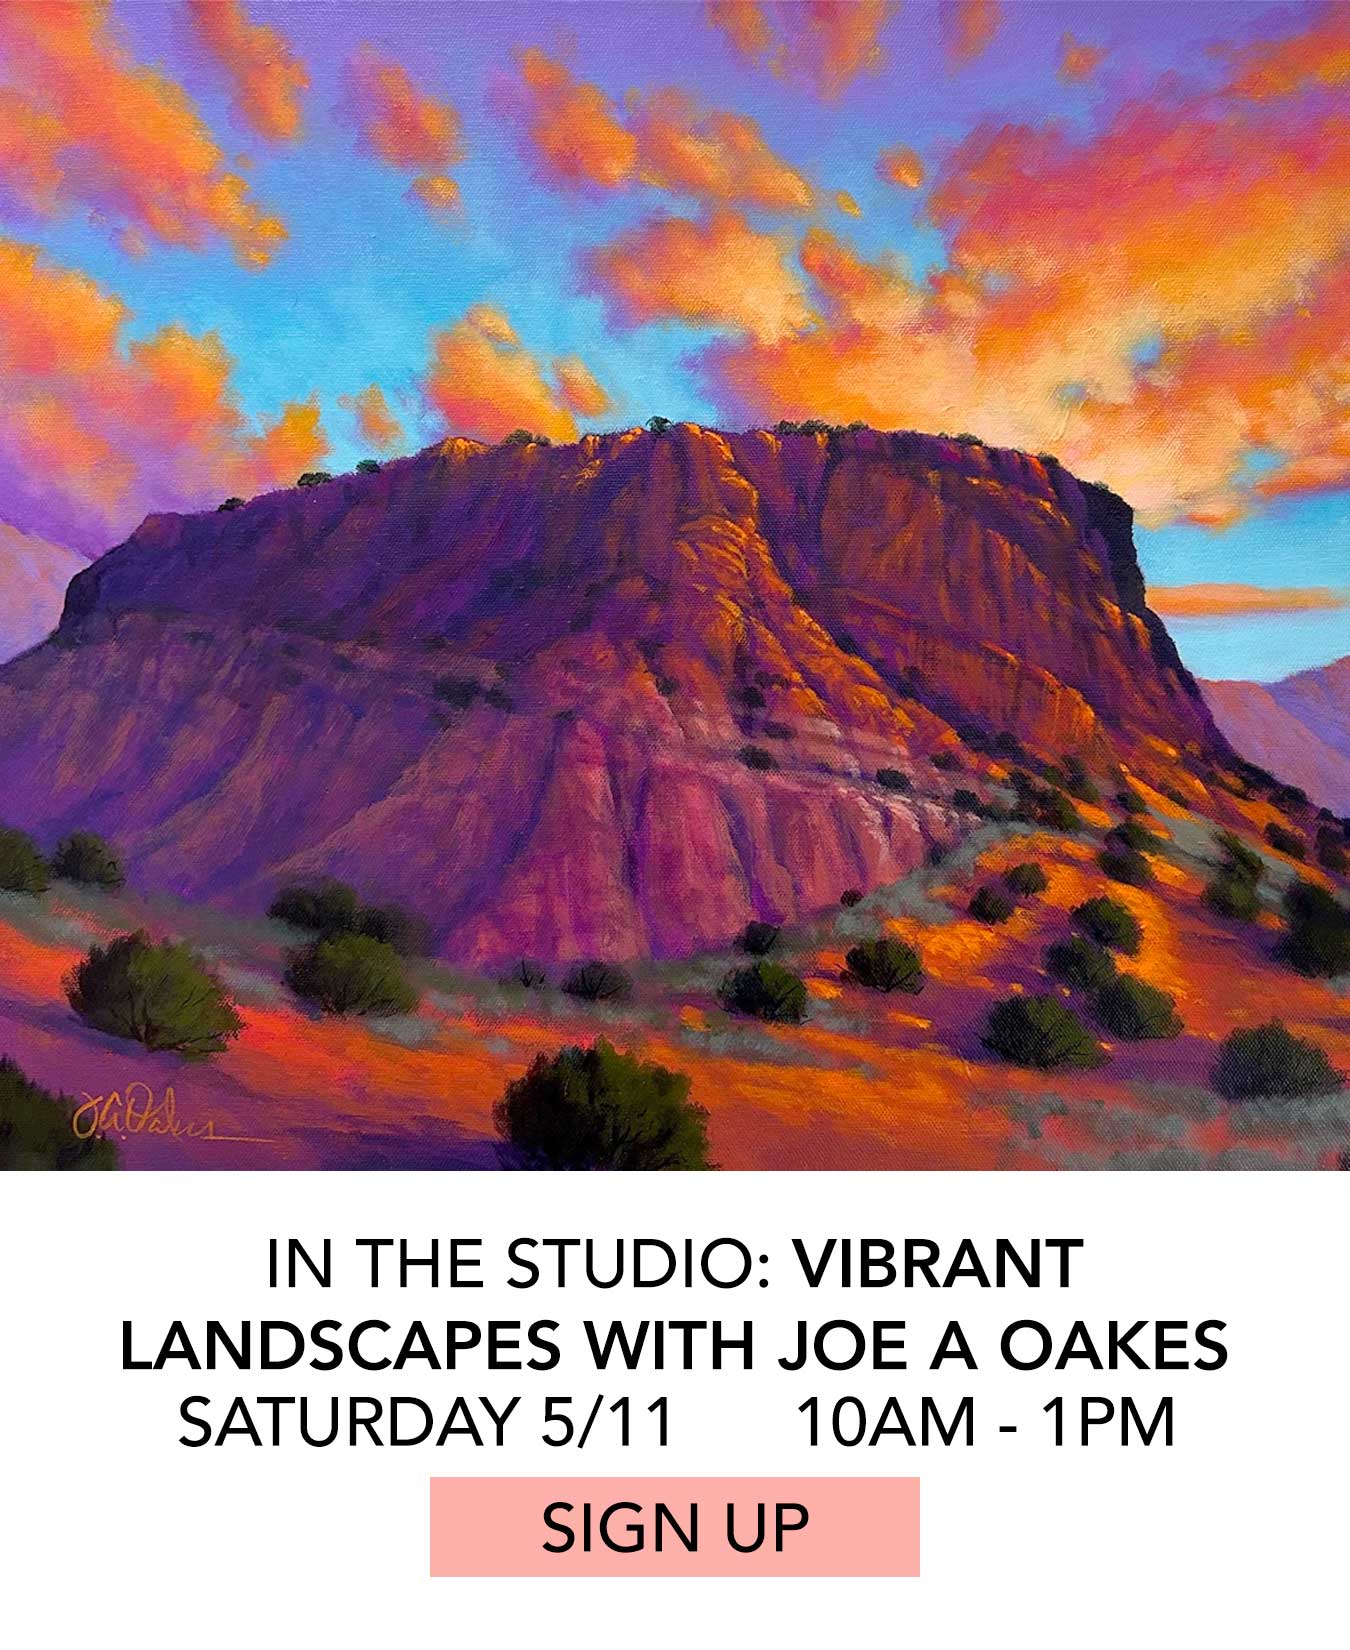 In the Studio: Vibrant Landscapes with Joe A Oakes. Saturday 5/11 from 10:00am to 1:00pm. Click to Sign Up.